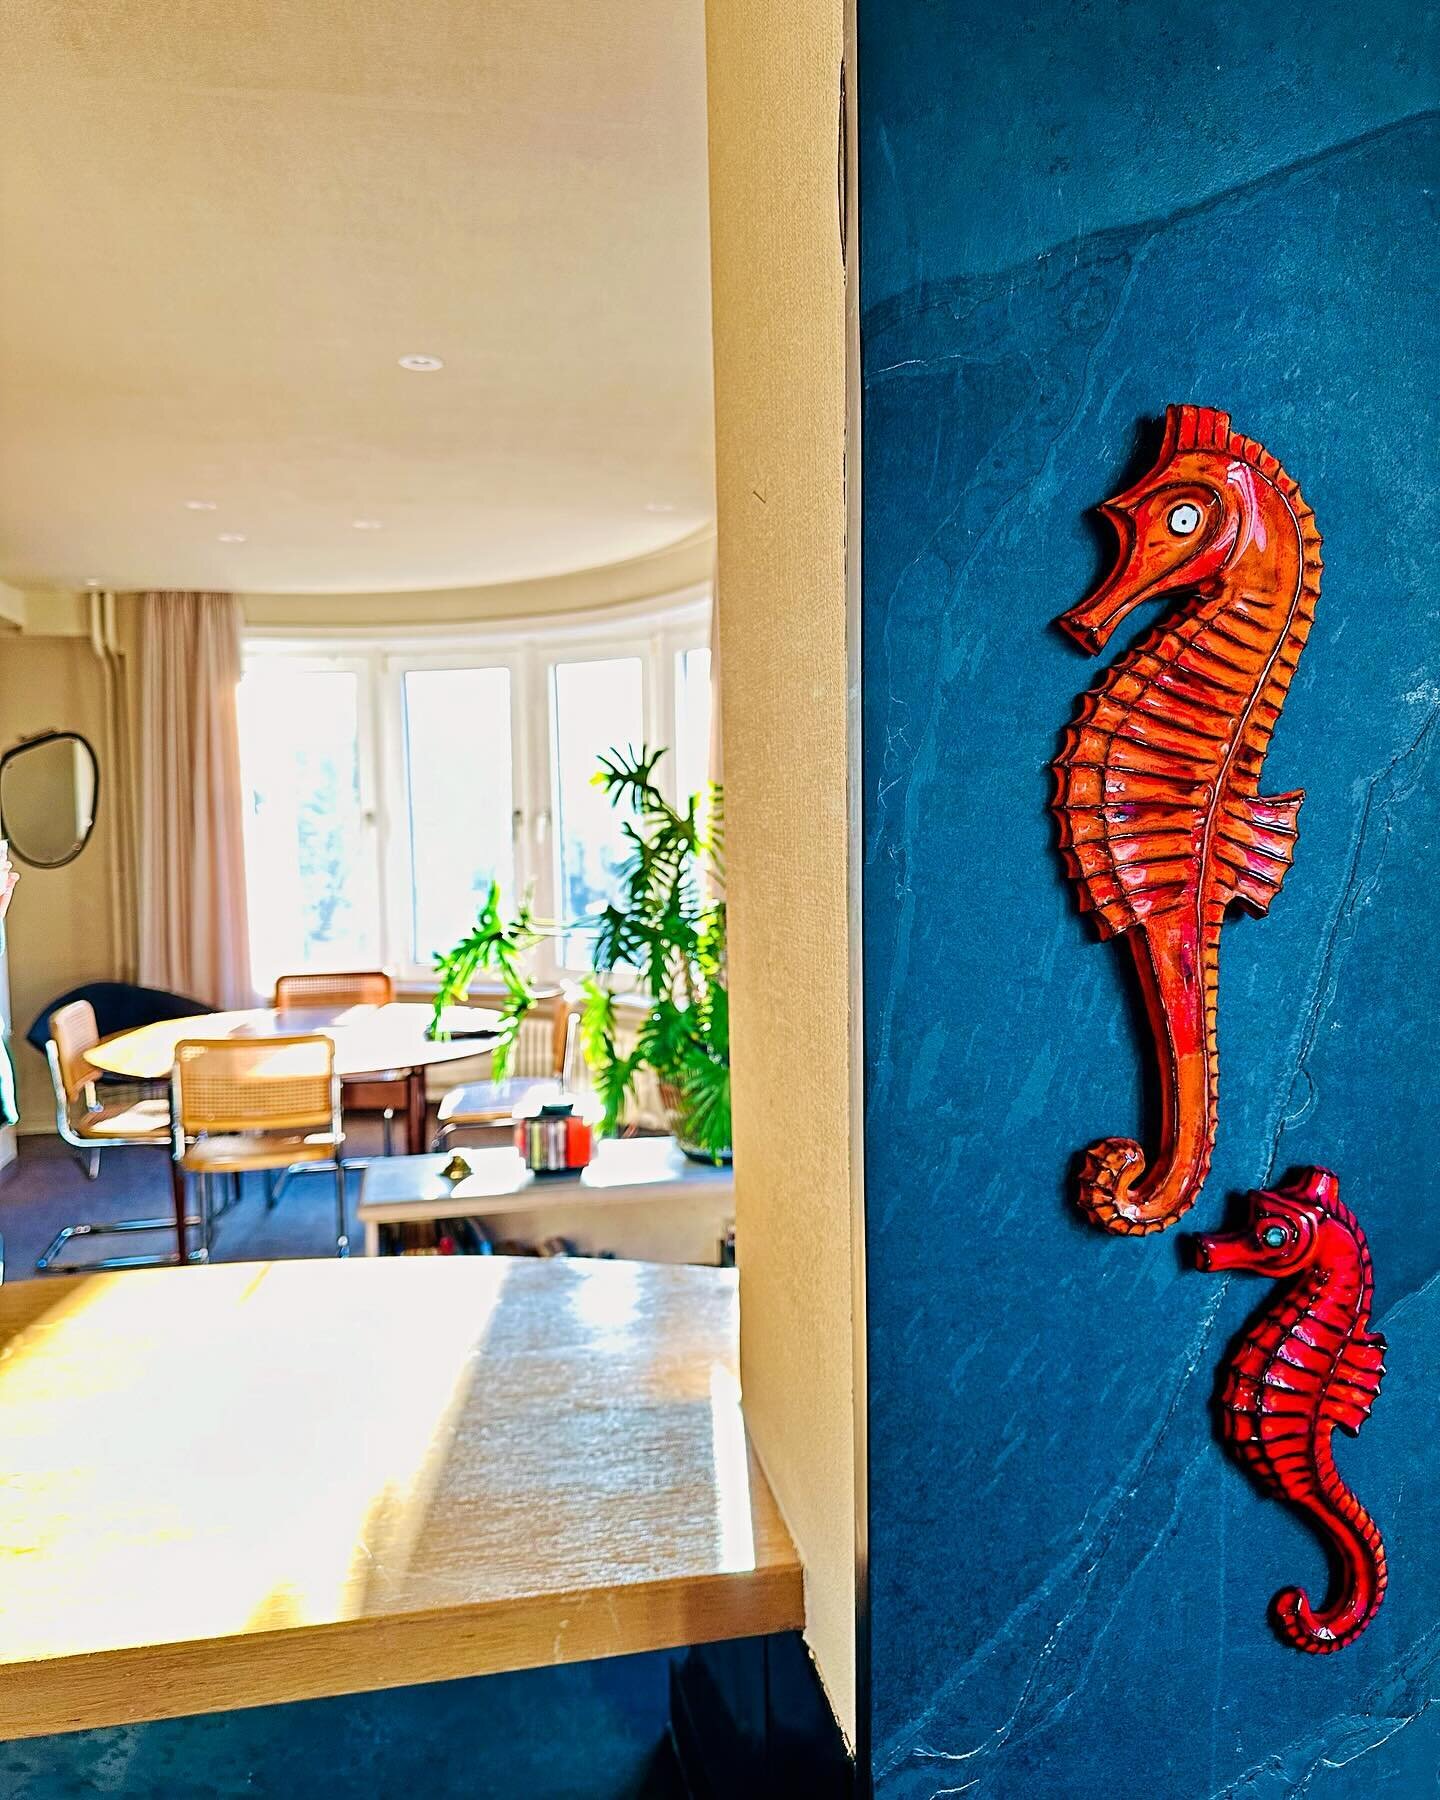 These two eclectic seahorses from Andr&eacute; Bayer (1906-1985) are watching over the @mariejose.oostende Residence. Bayer left the Paris region for 🇧🇪Belgium in the early 1930s. Bayer ceramics was a family business: his wife did the enamel work a